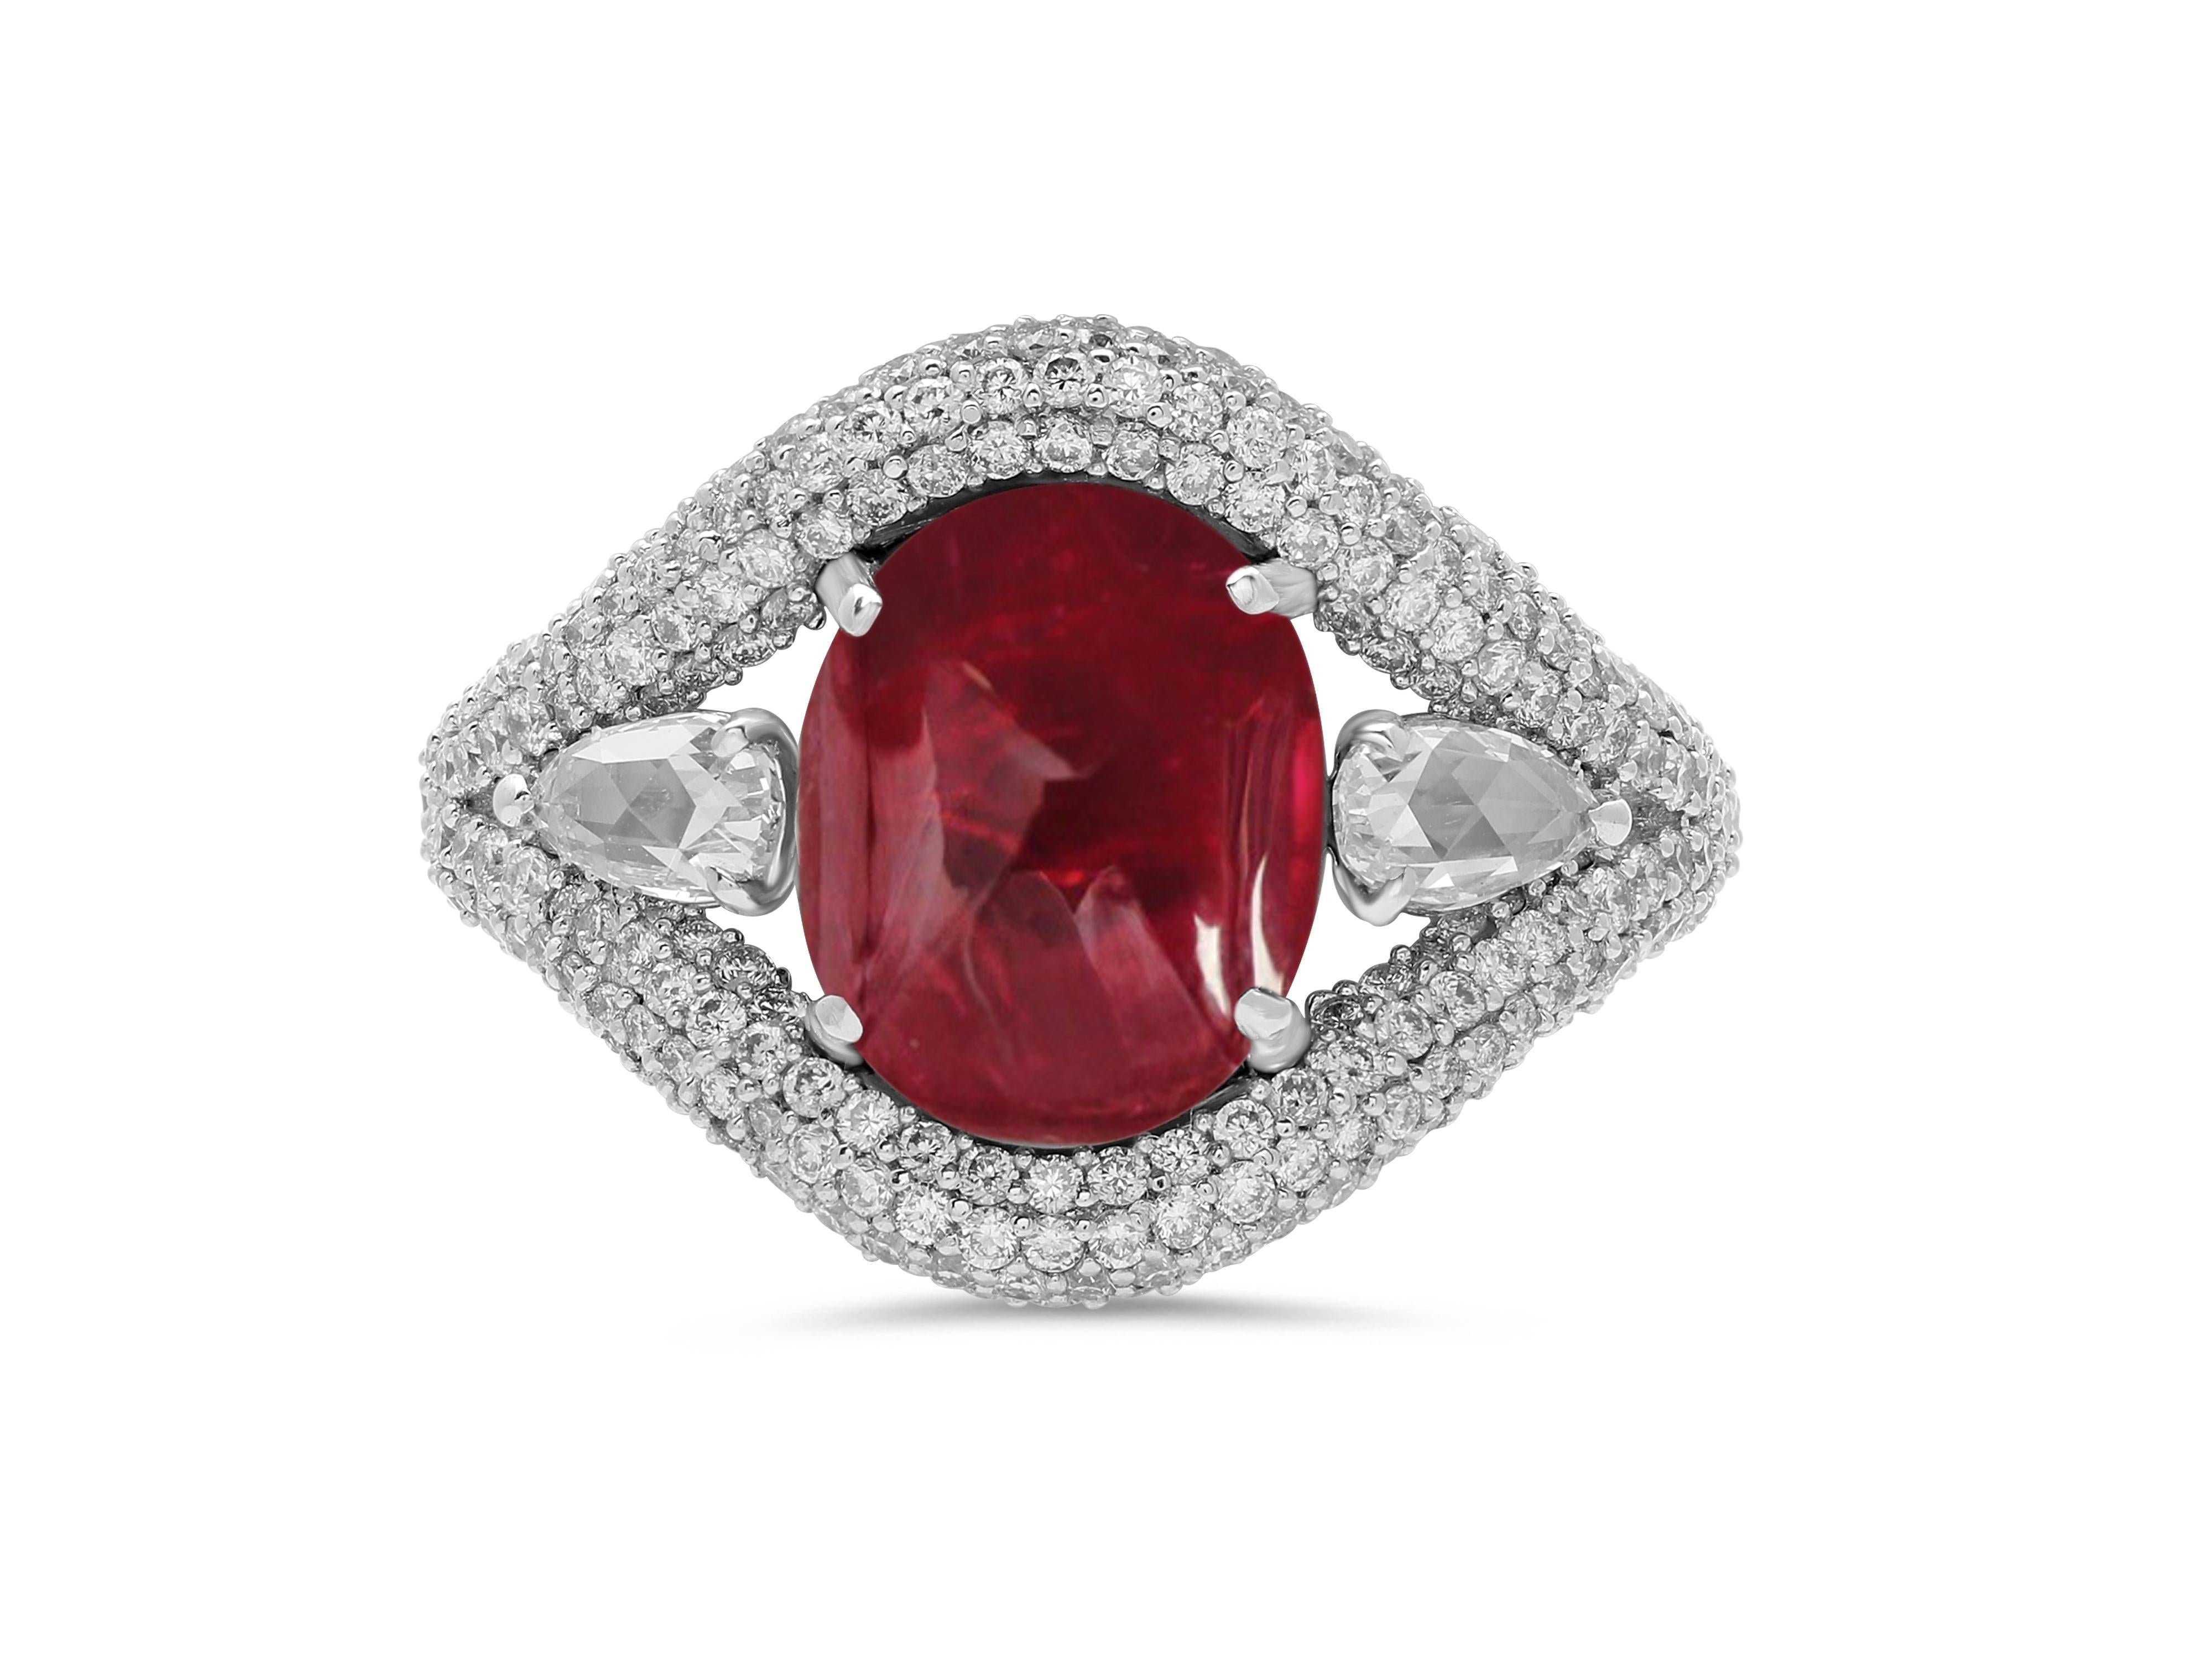 A stunning 3.52 carat round, rubellite cabochon forms the heart of this ring, surrounded by a carpet of handset diamonds.

The fluid lines of the design provide a perfect base for the micro-pave setting, creating a distinctive yet elegant